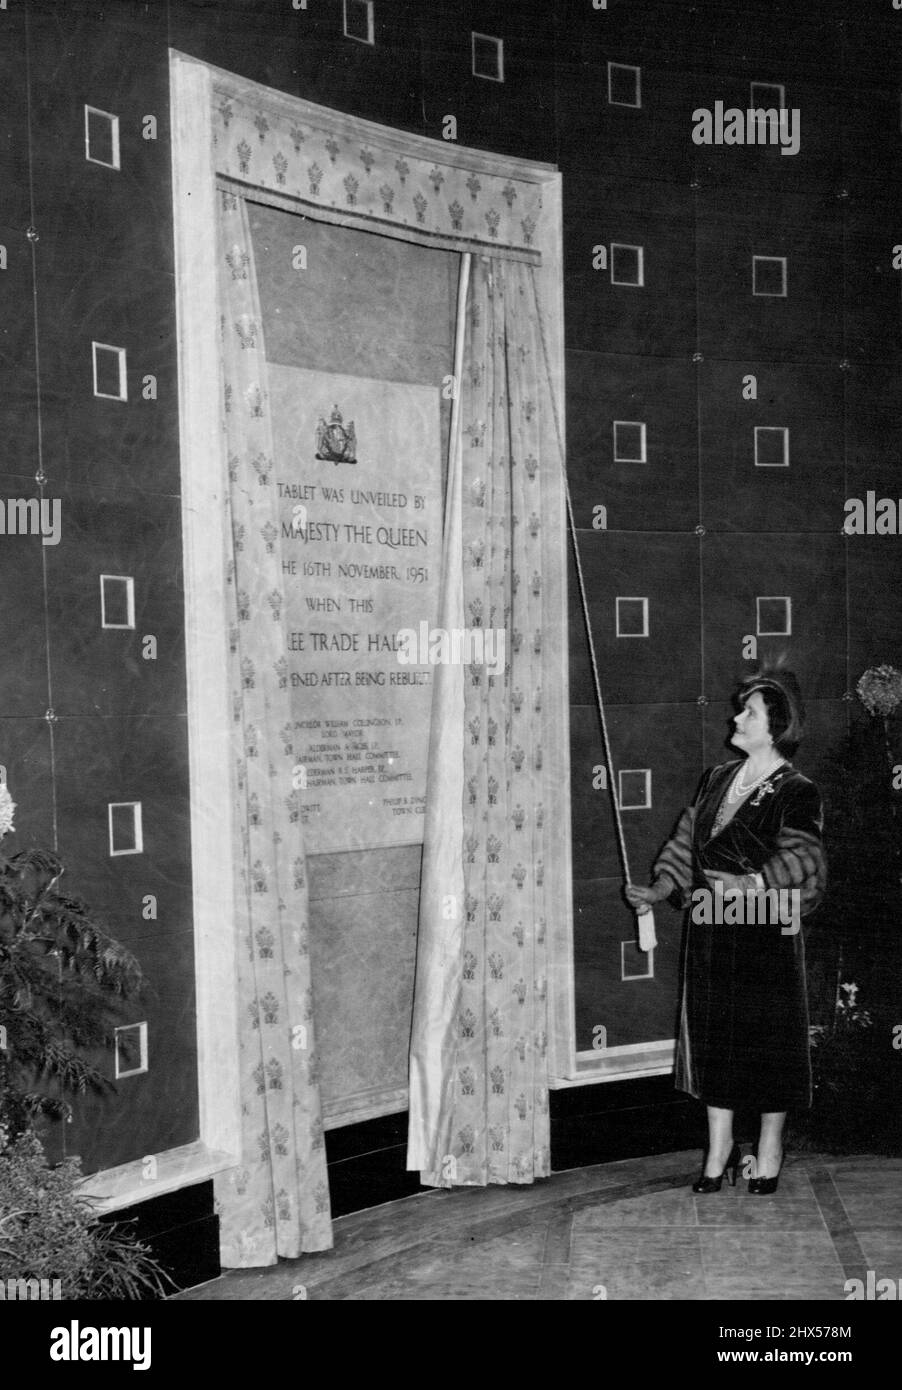 The Queen Opens Manchester's Rebuilt Free Trade Hall -- Her Majesty unveilling the tablet at the entrance to the rebuilt free Trade Hall in Manchester on Friday. Her Majesty the Queen performed the opening ceremony of the rebuilt free Trade hall in Manchester on Friday November 16th, unveiling a tablet at the entrance to Mark the event. November 19, 1951. (Photo by Fox Photos) Stock Photo